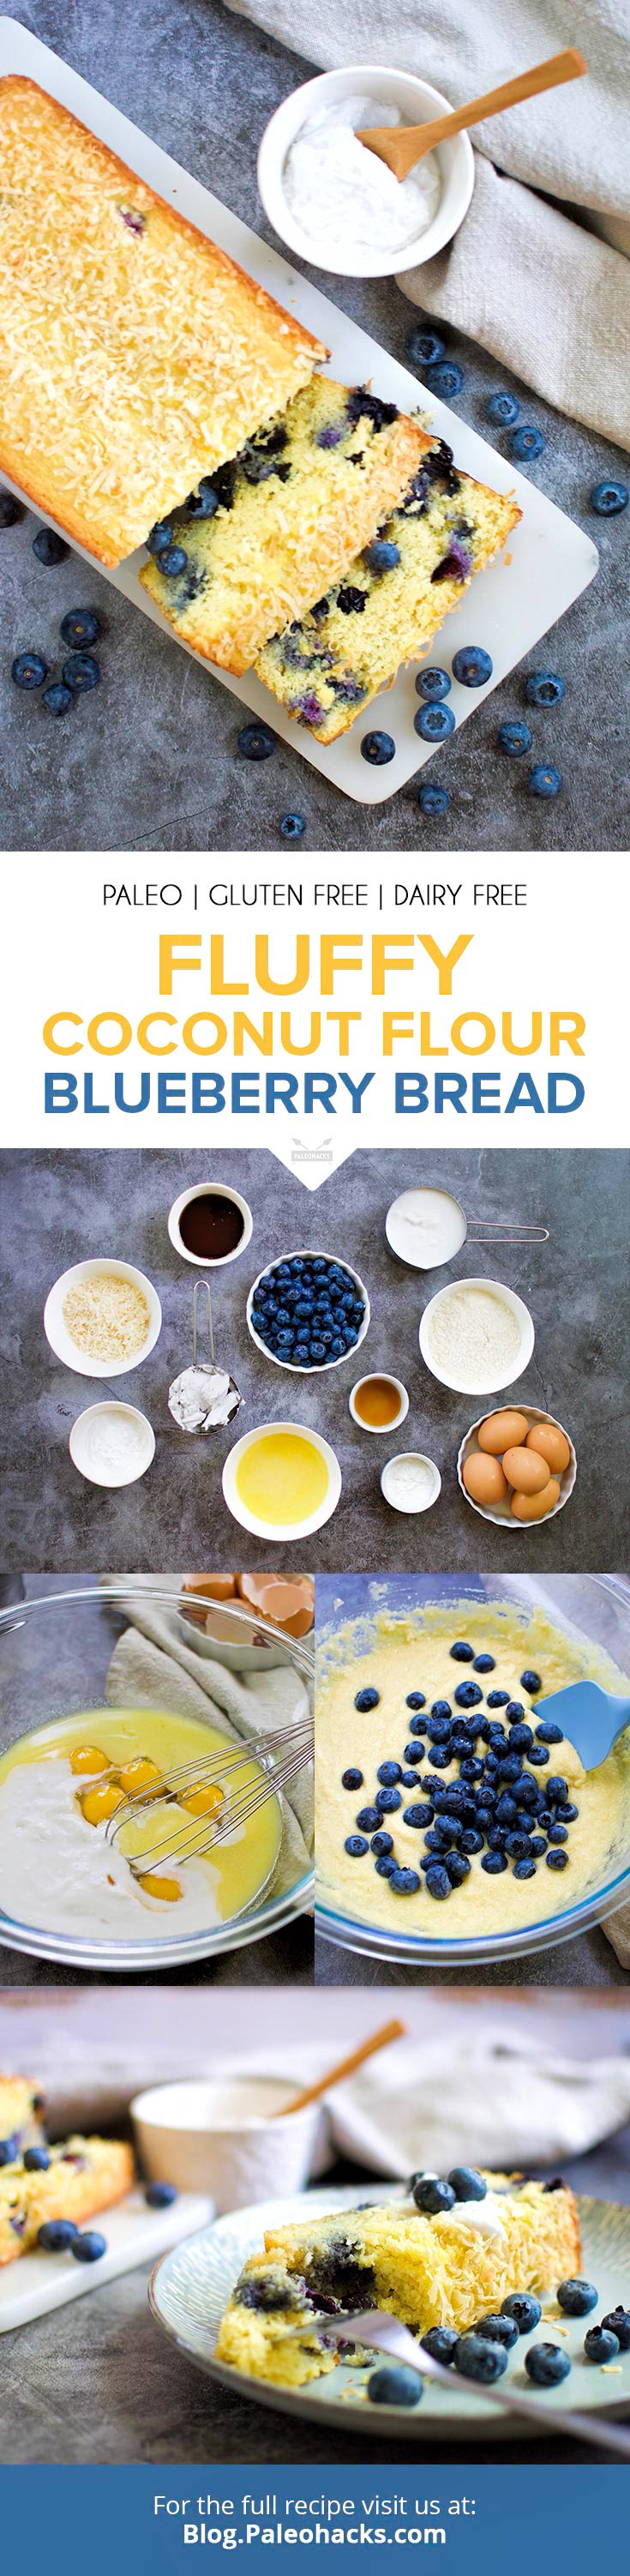 Craving a Paleo treat? Make this lighter-than-air blueberry coconut bread with just 10 minutes of prep!